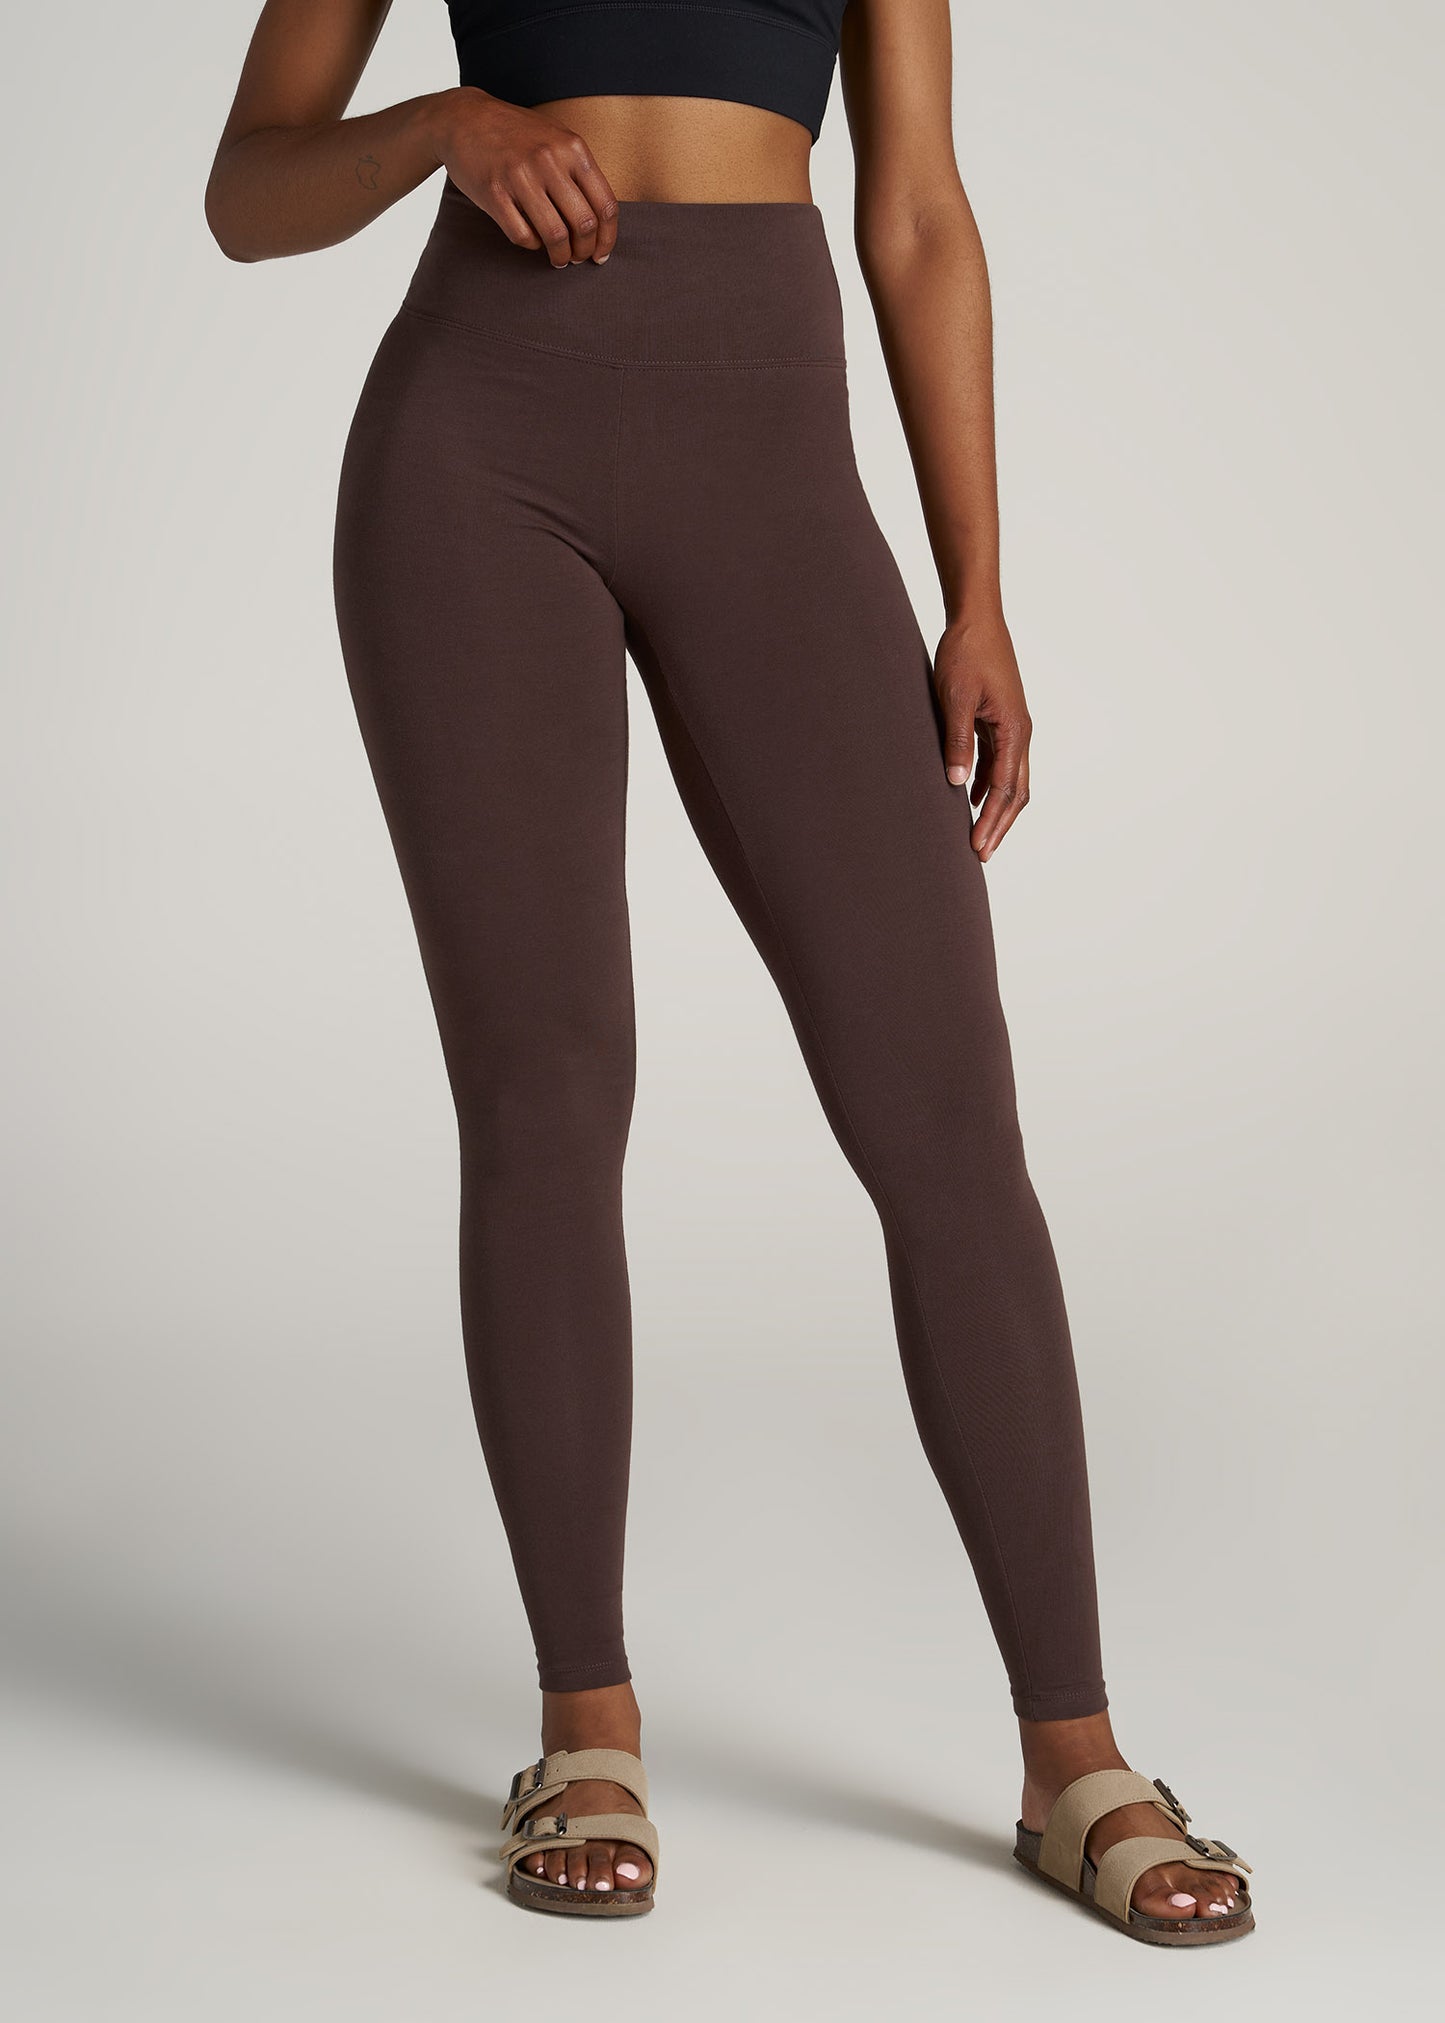 A tall woman wearing American Tall's Cotton Legging in the color chocolate.